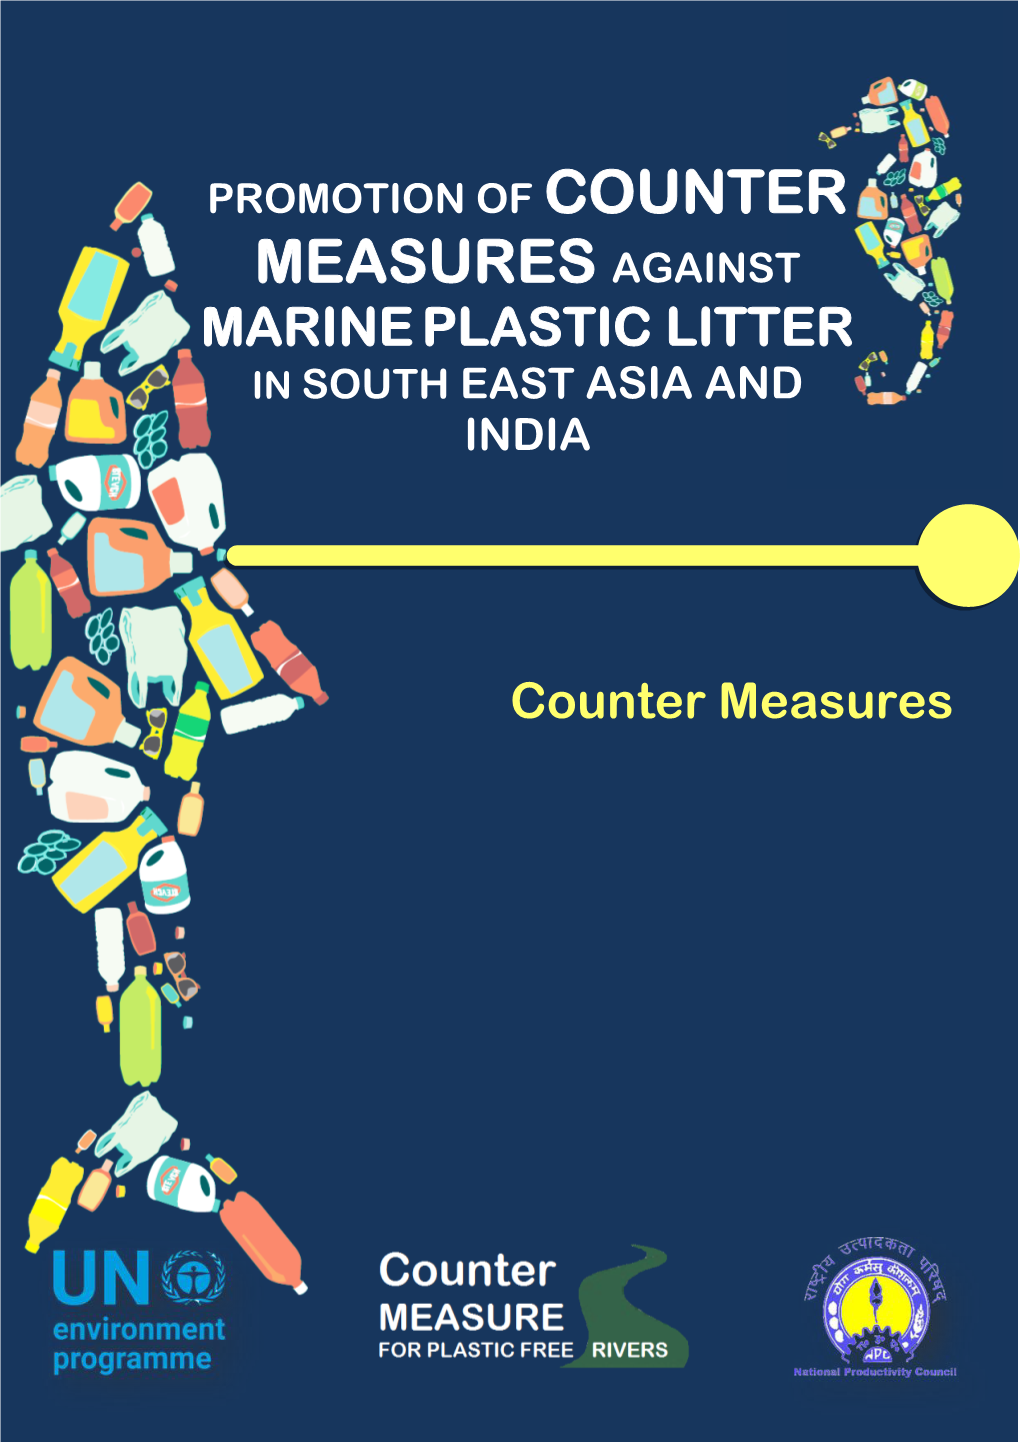 Material Cycle of Plastic & Counter Measures